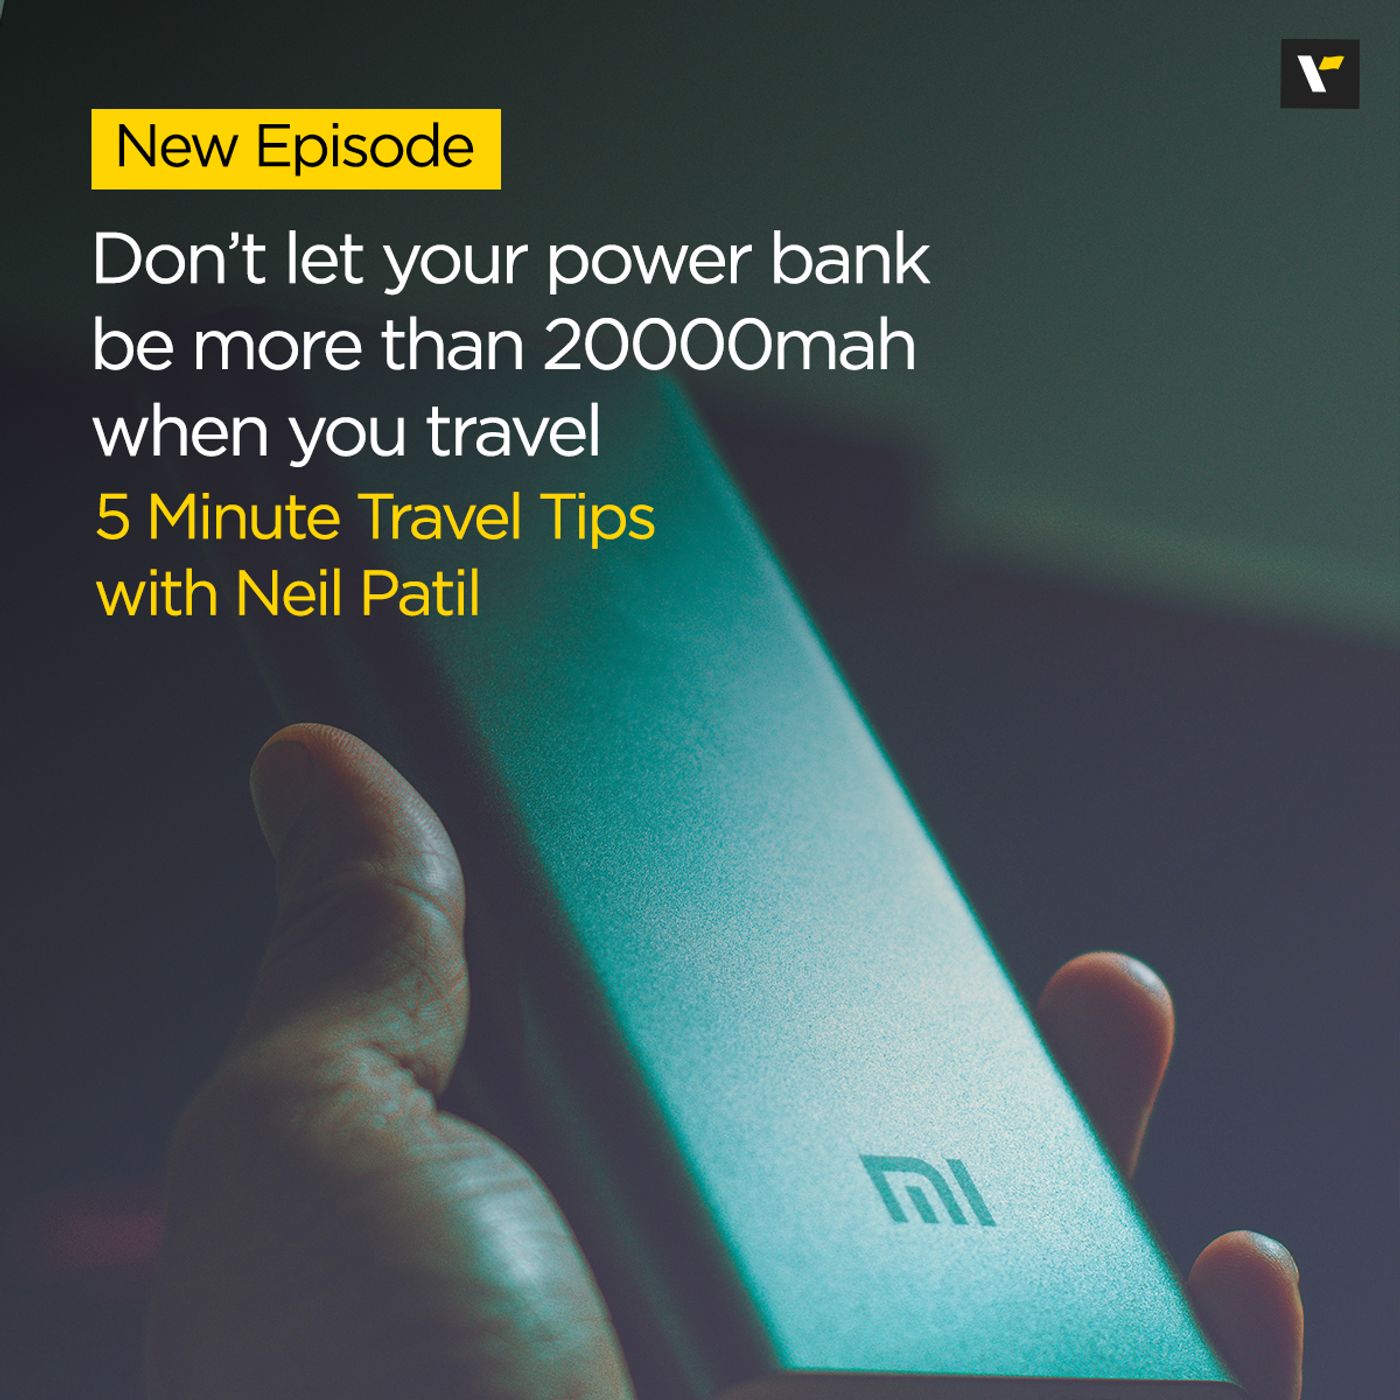 Don’t let your power bank be more than 20000mah when you travel